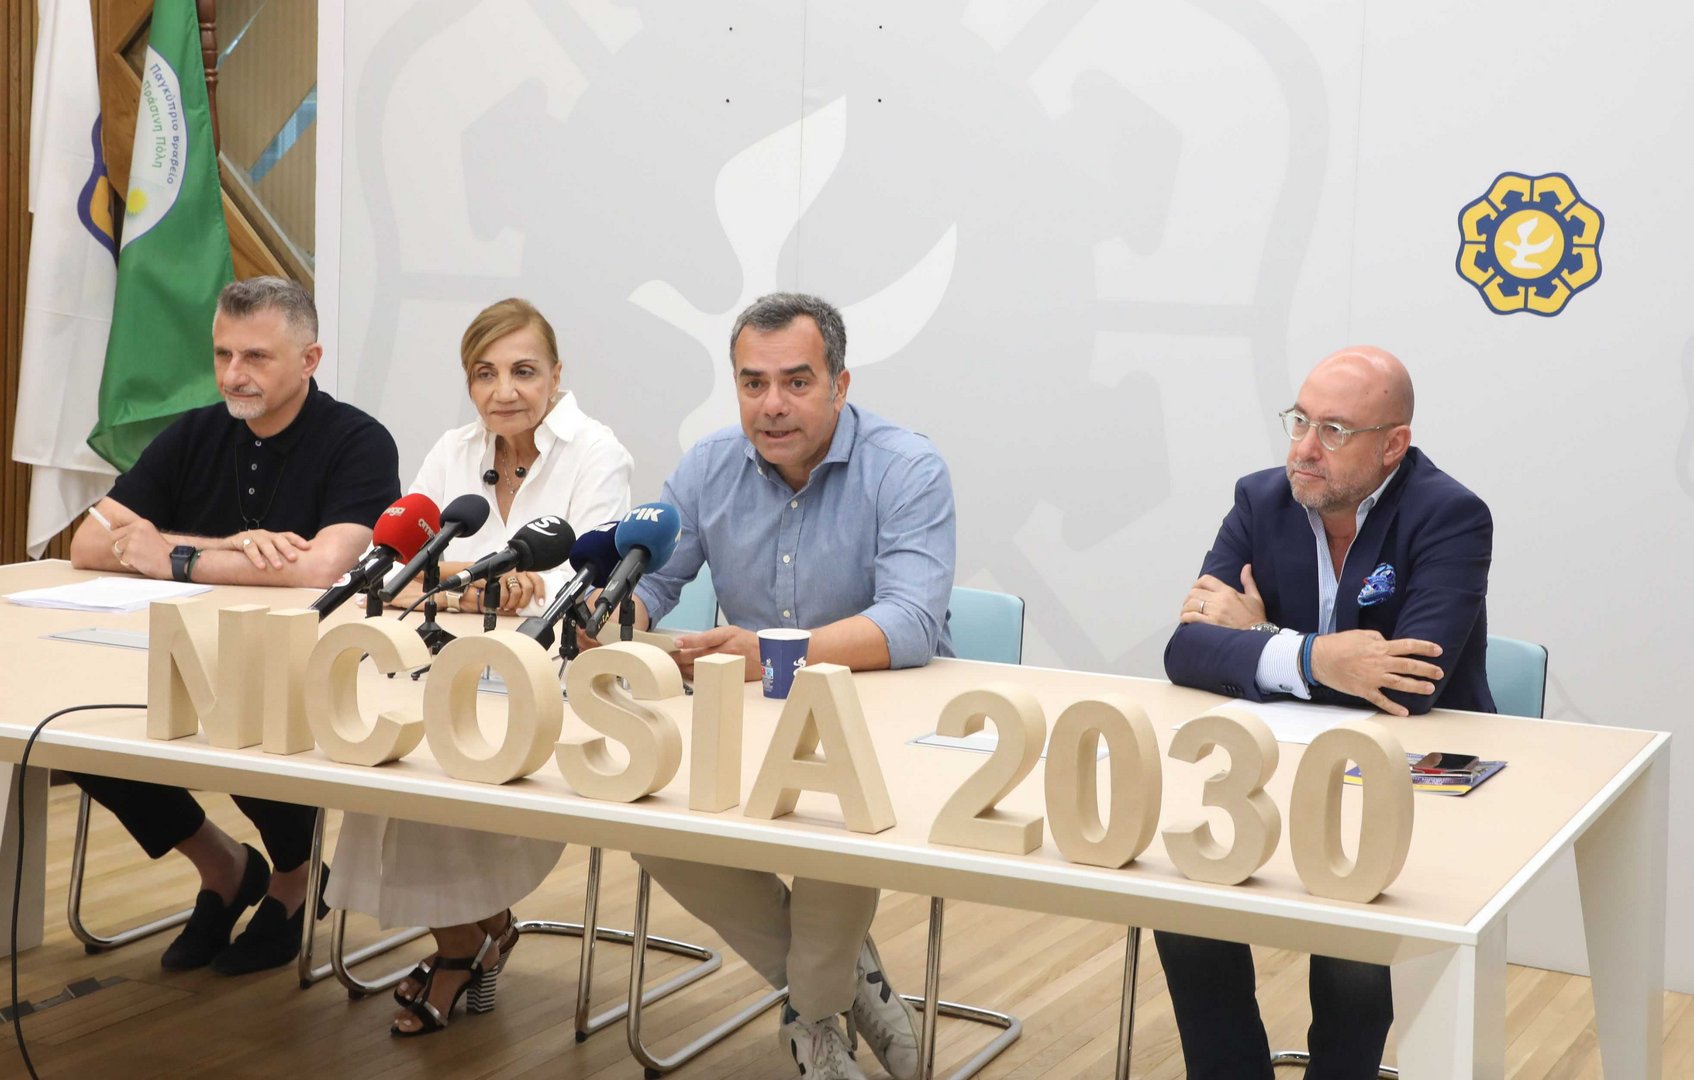 image Nicosia announces candidacy for 2030 European capital of culture